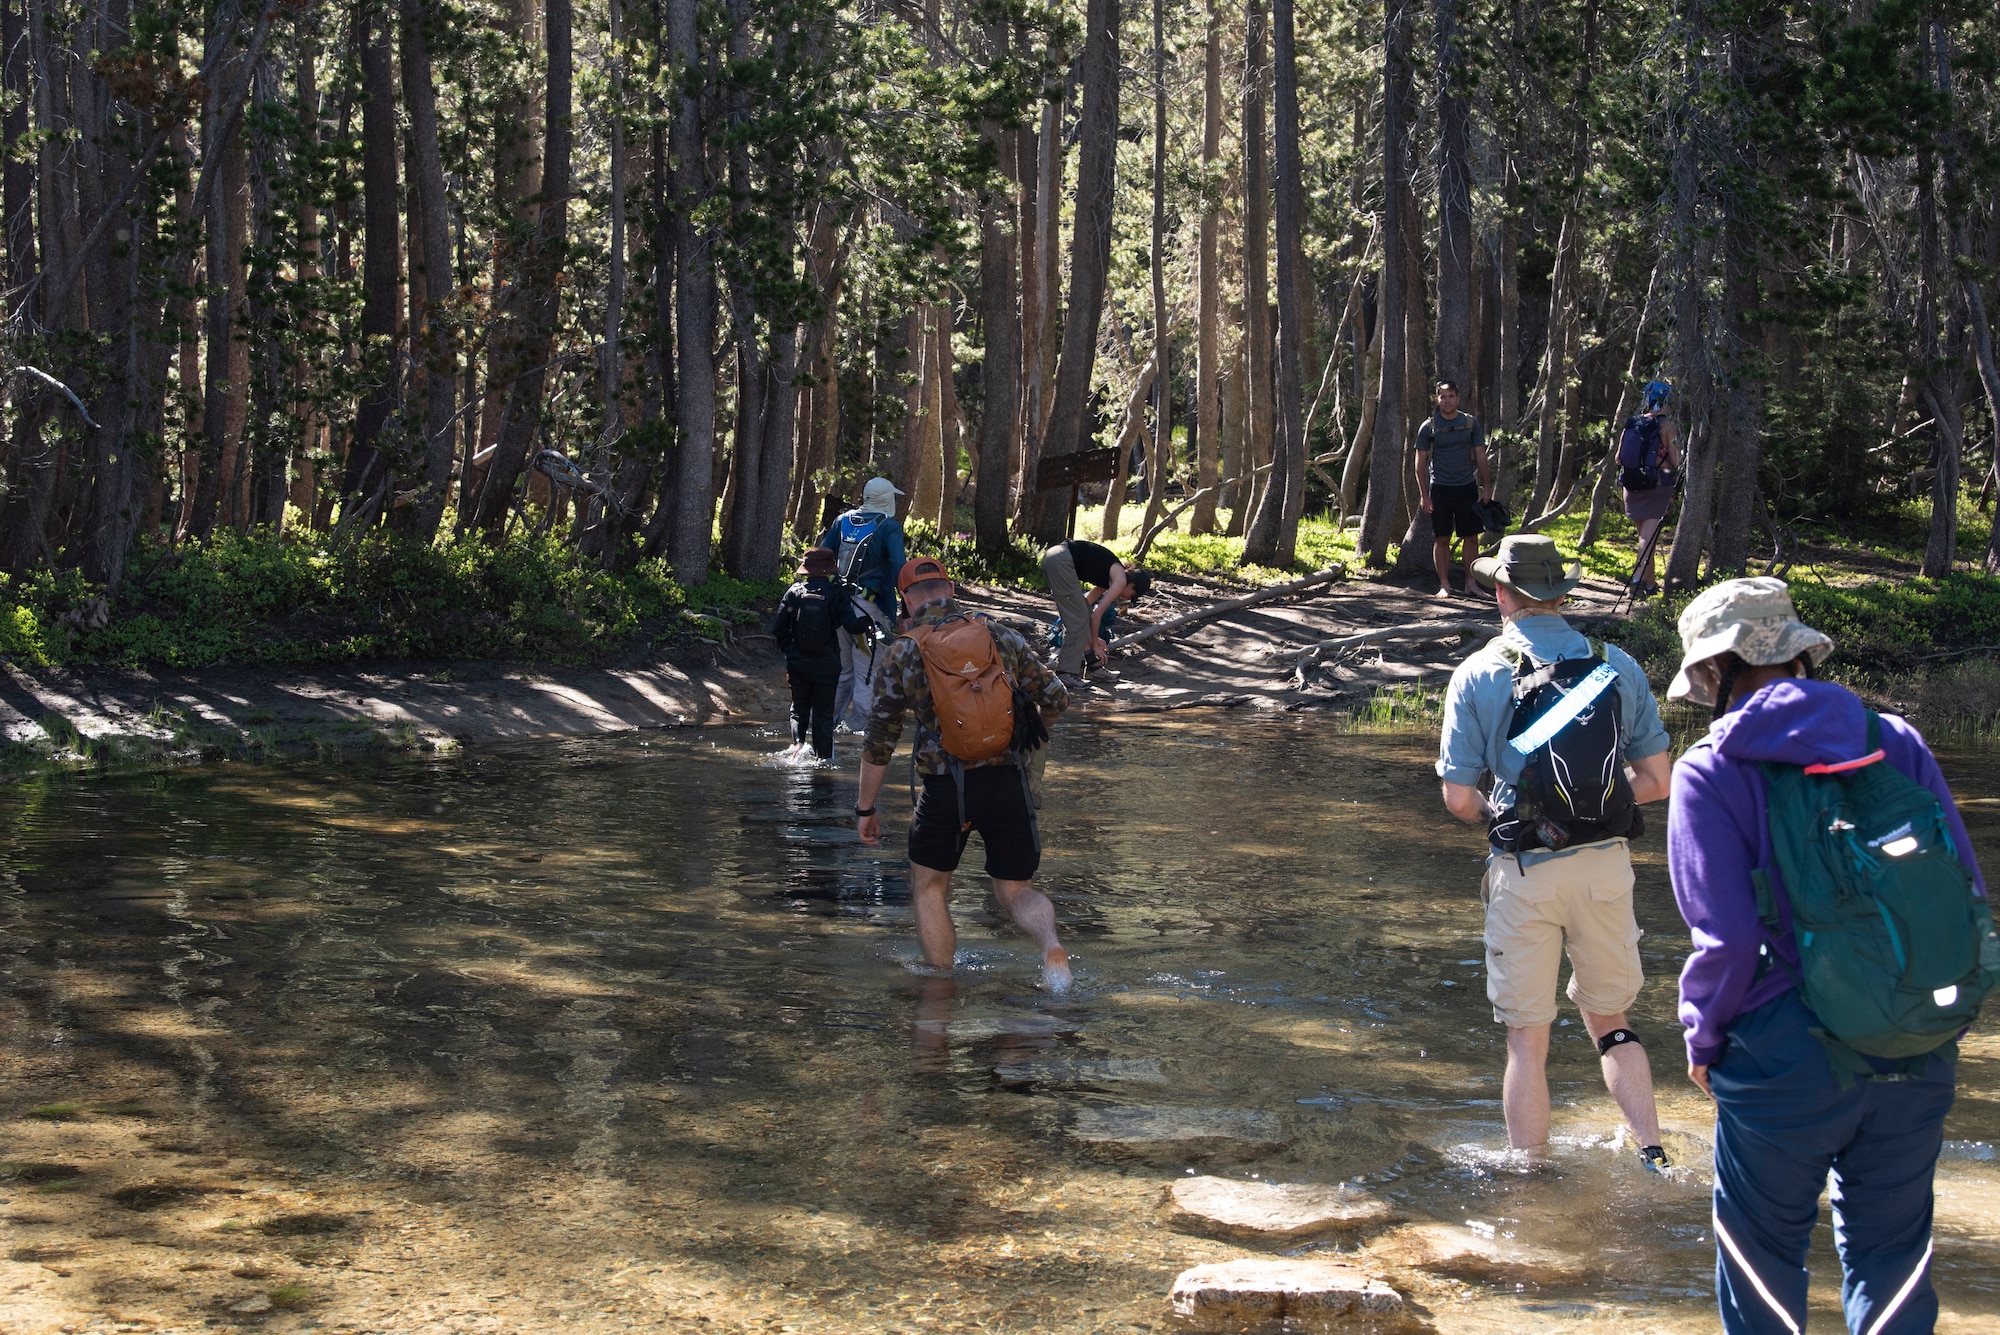 U.S. Air Force Airmen from Travis Air Force Base, California, cross a river during a resilience hike July 13, 2019, Yosemite National Park, California. The Airmen hiked to Cloud’s Rest covering 14.57 miles as they climbed to 9,926 feet above sea level. The hike was organized to enhance the Airmen’s physical, mental and spiritual resiliency. (U.S. Air Fore photo by Tech. Sgt. James Hodgman)